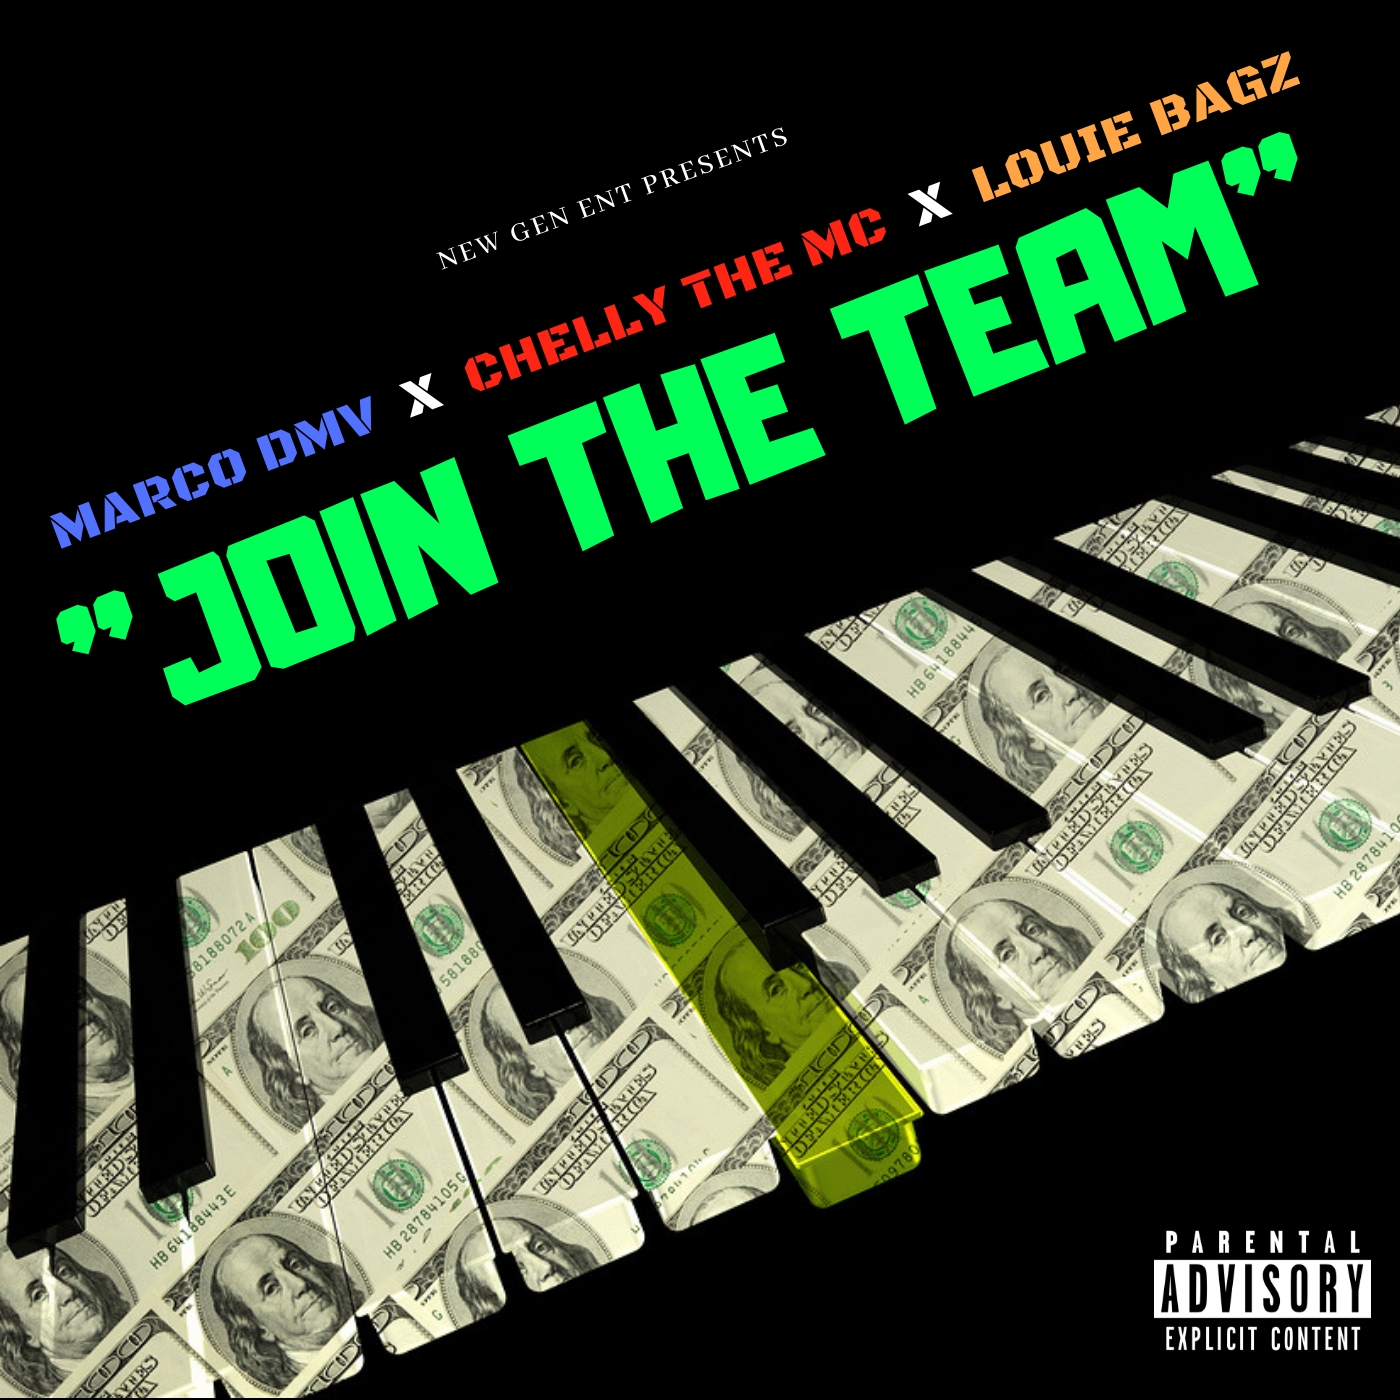 Marco DMV - Join the Team (feat. Chelly the MC & Louie Bagz) (Bachelor Pad - EP)